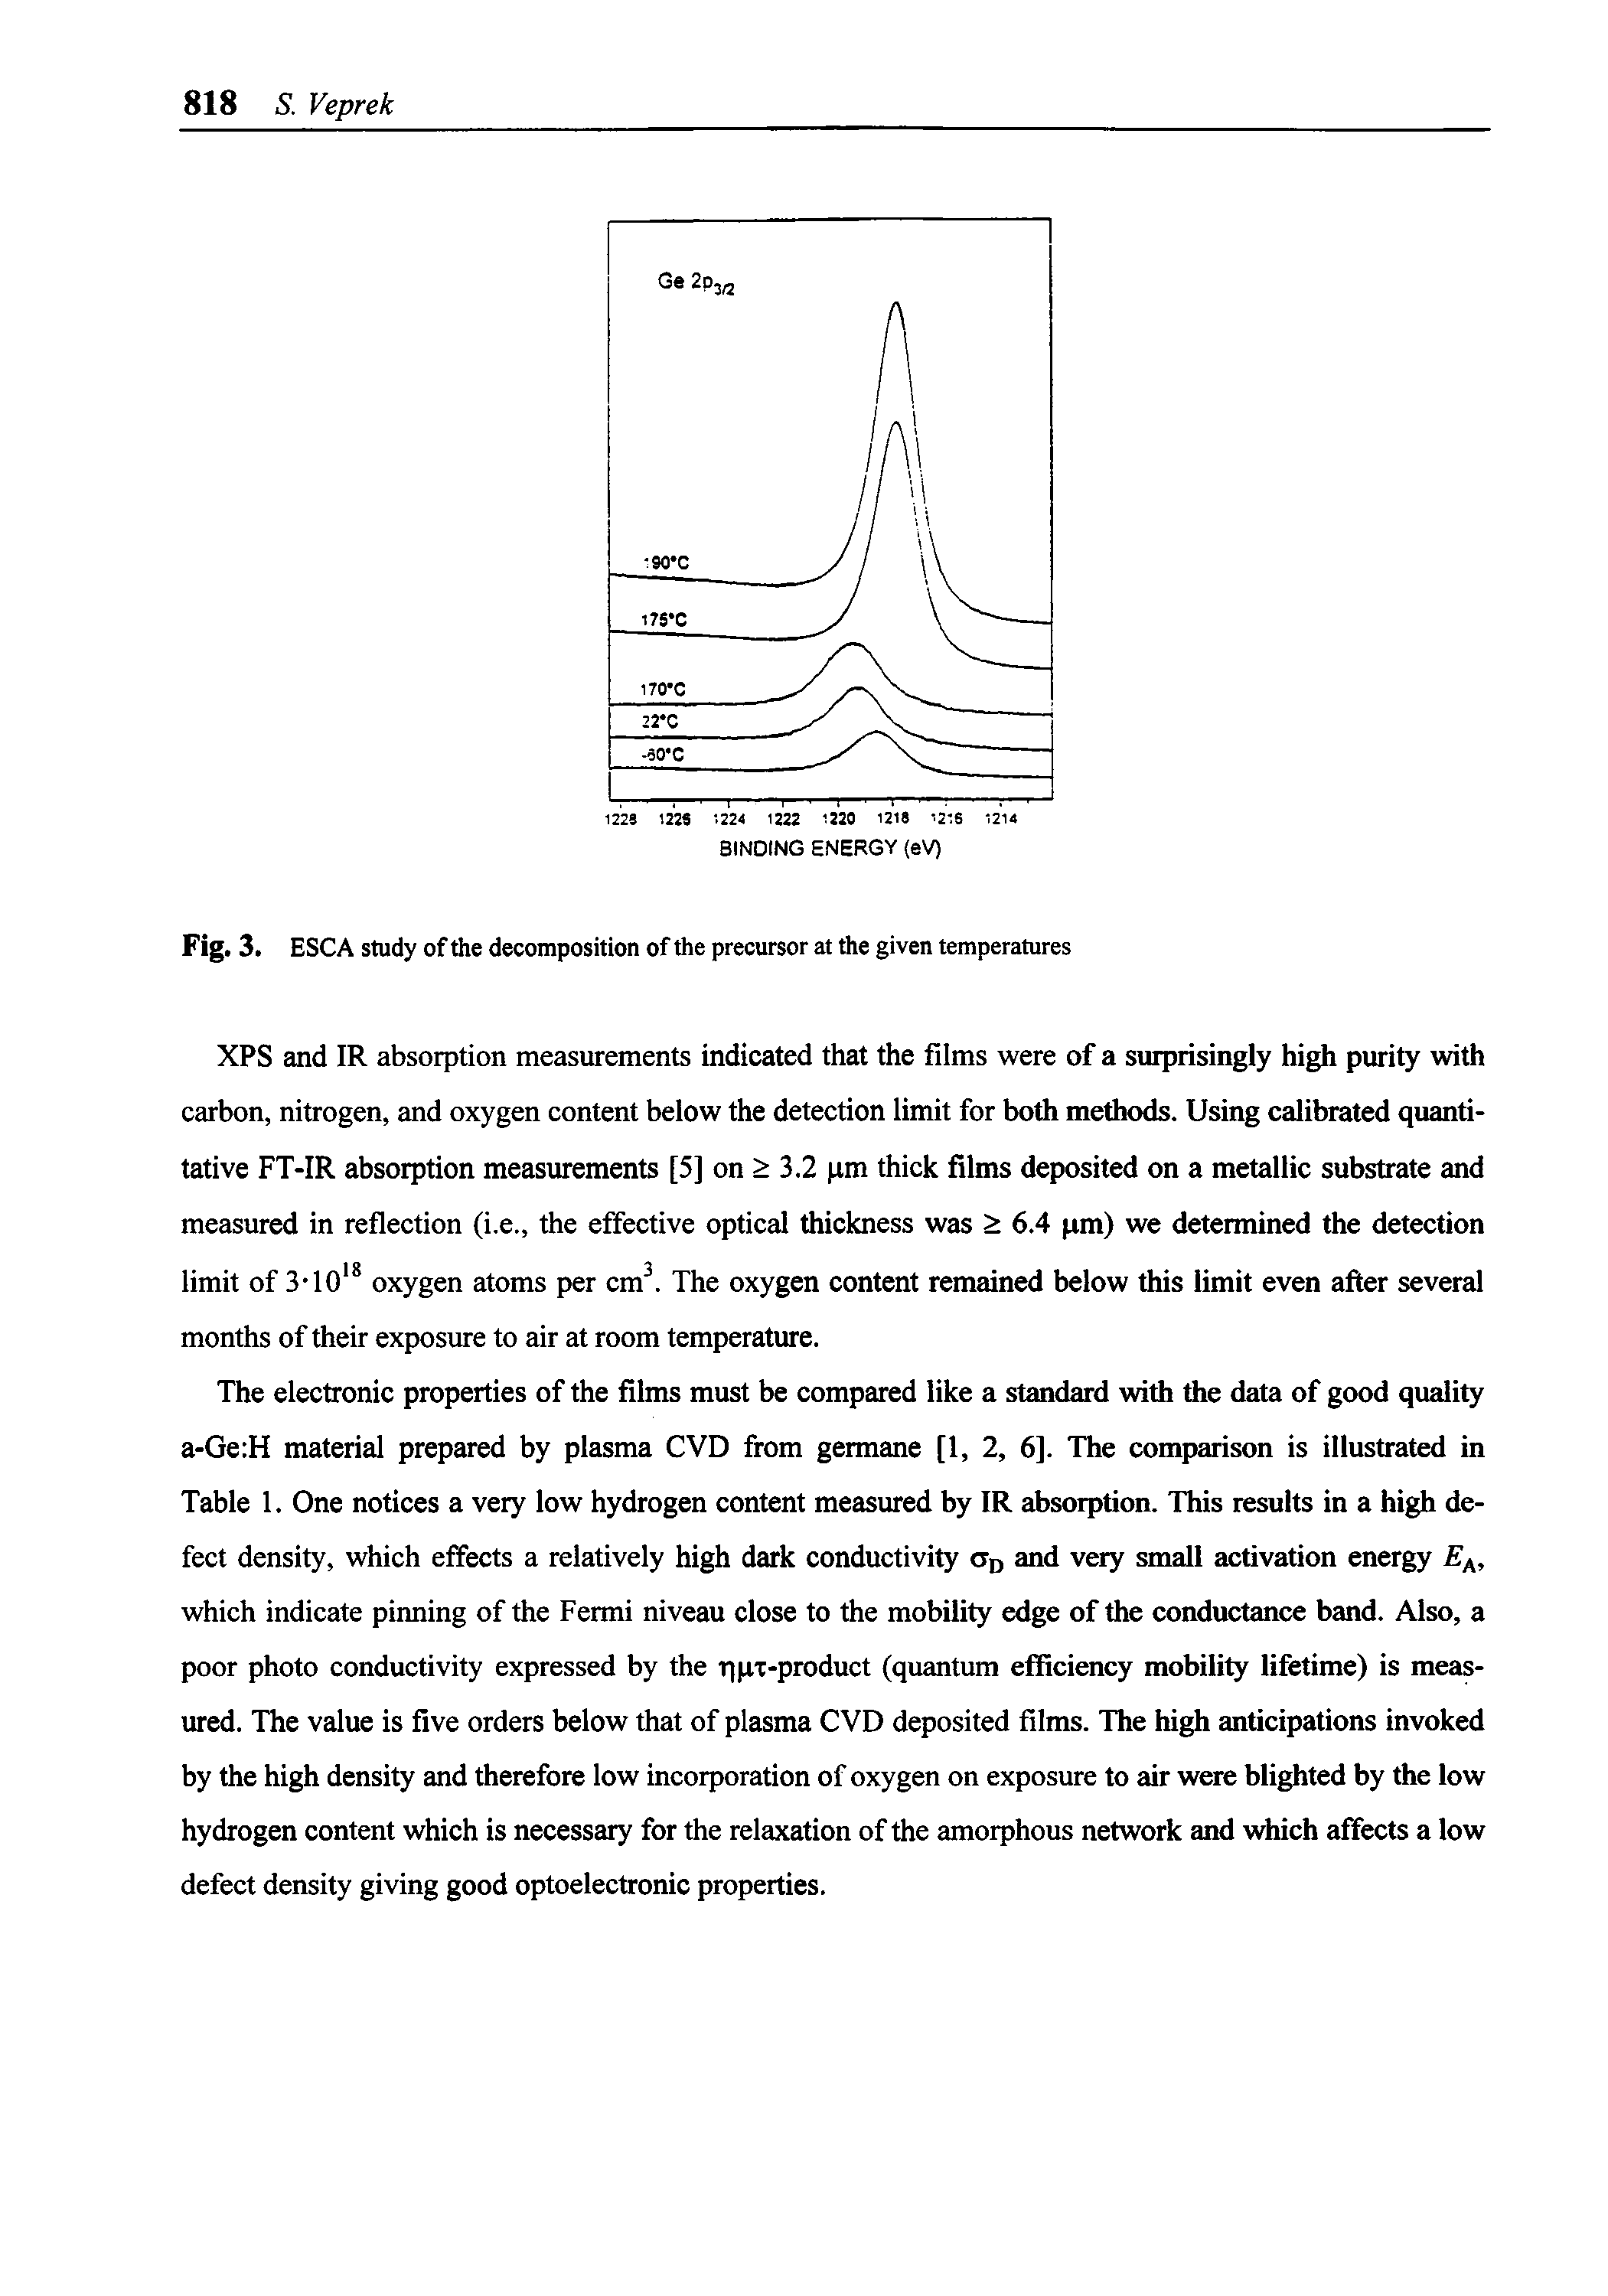 Fig. 3. ESCA study of the decomposition of the precursor at the given temperatures...